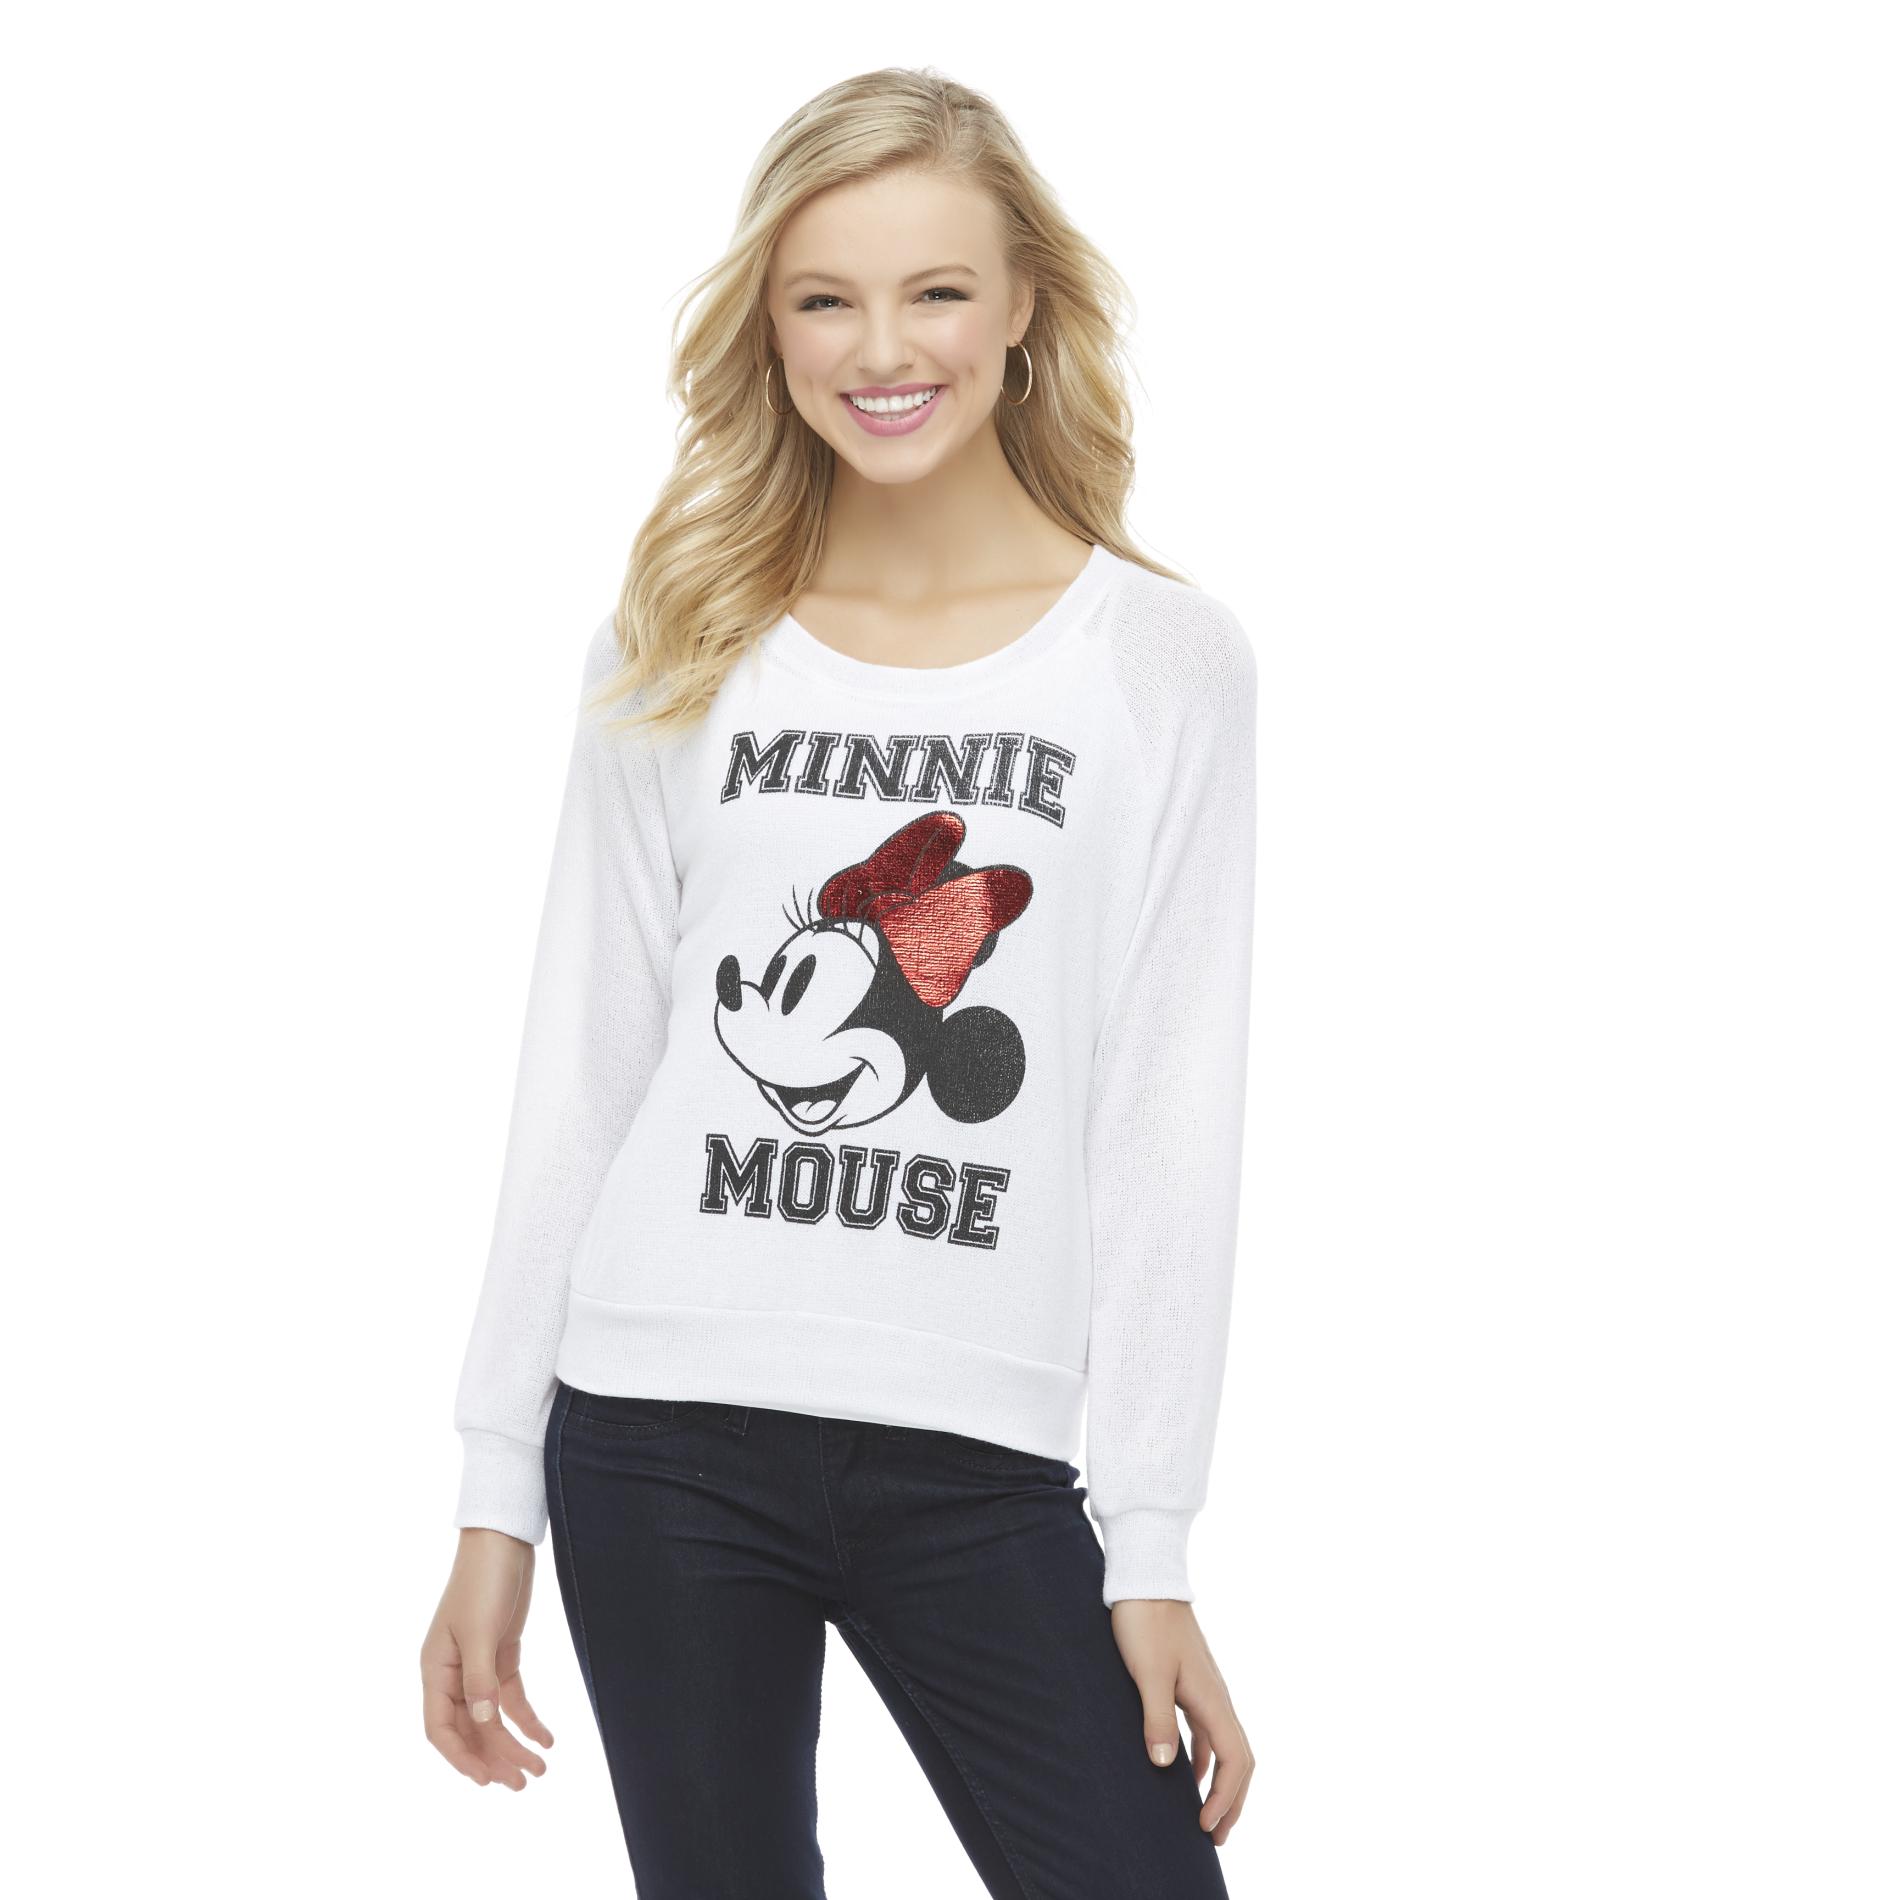 Disney Minnie Mouse Junior's Novelty Sweater